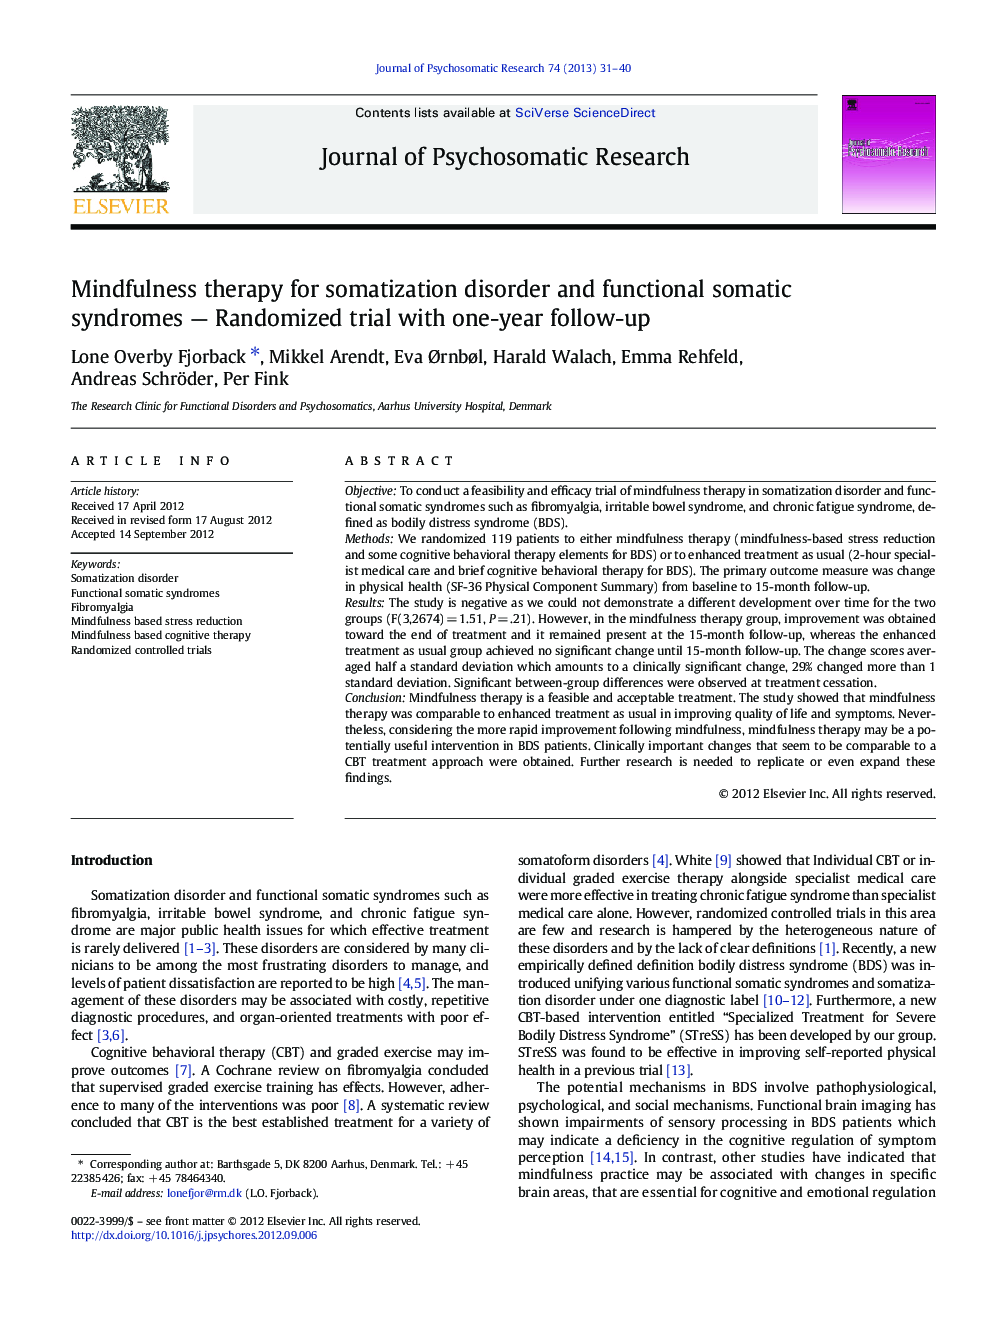 Mindfulness therapy for somatization disorder and functional somatic syndromes - Randomized trial with one-year follow-up